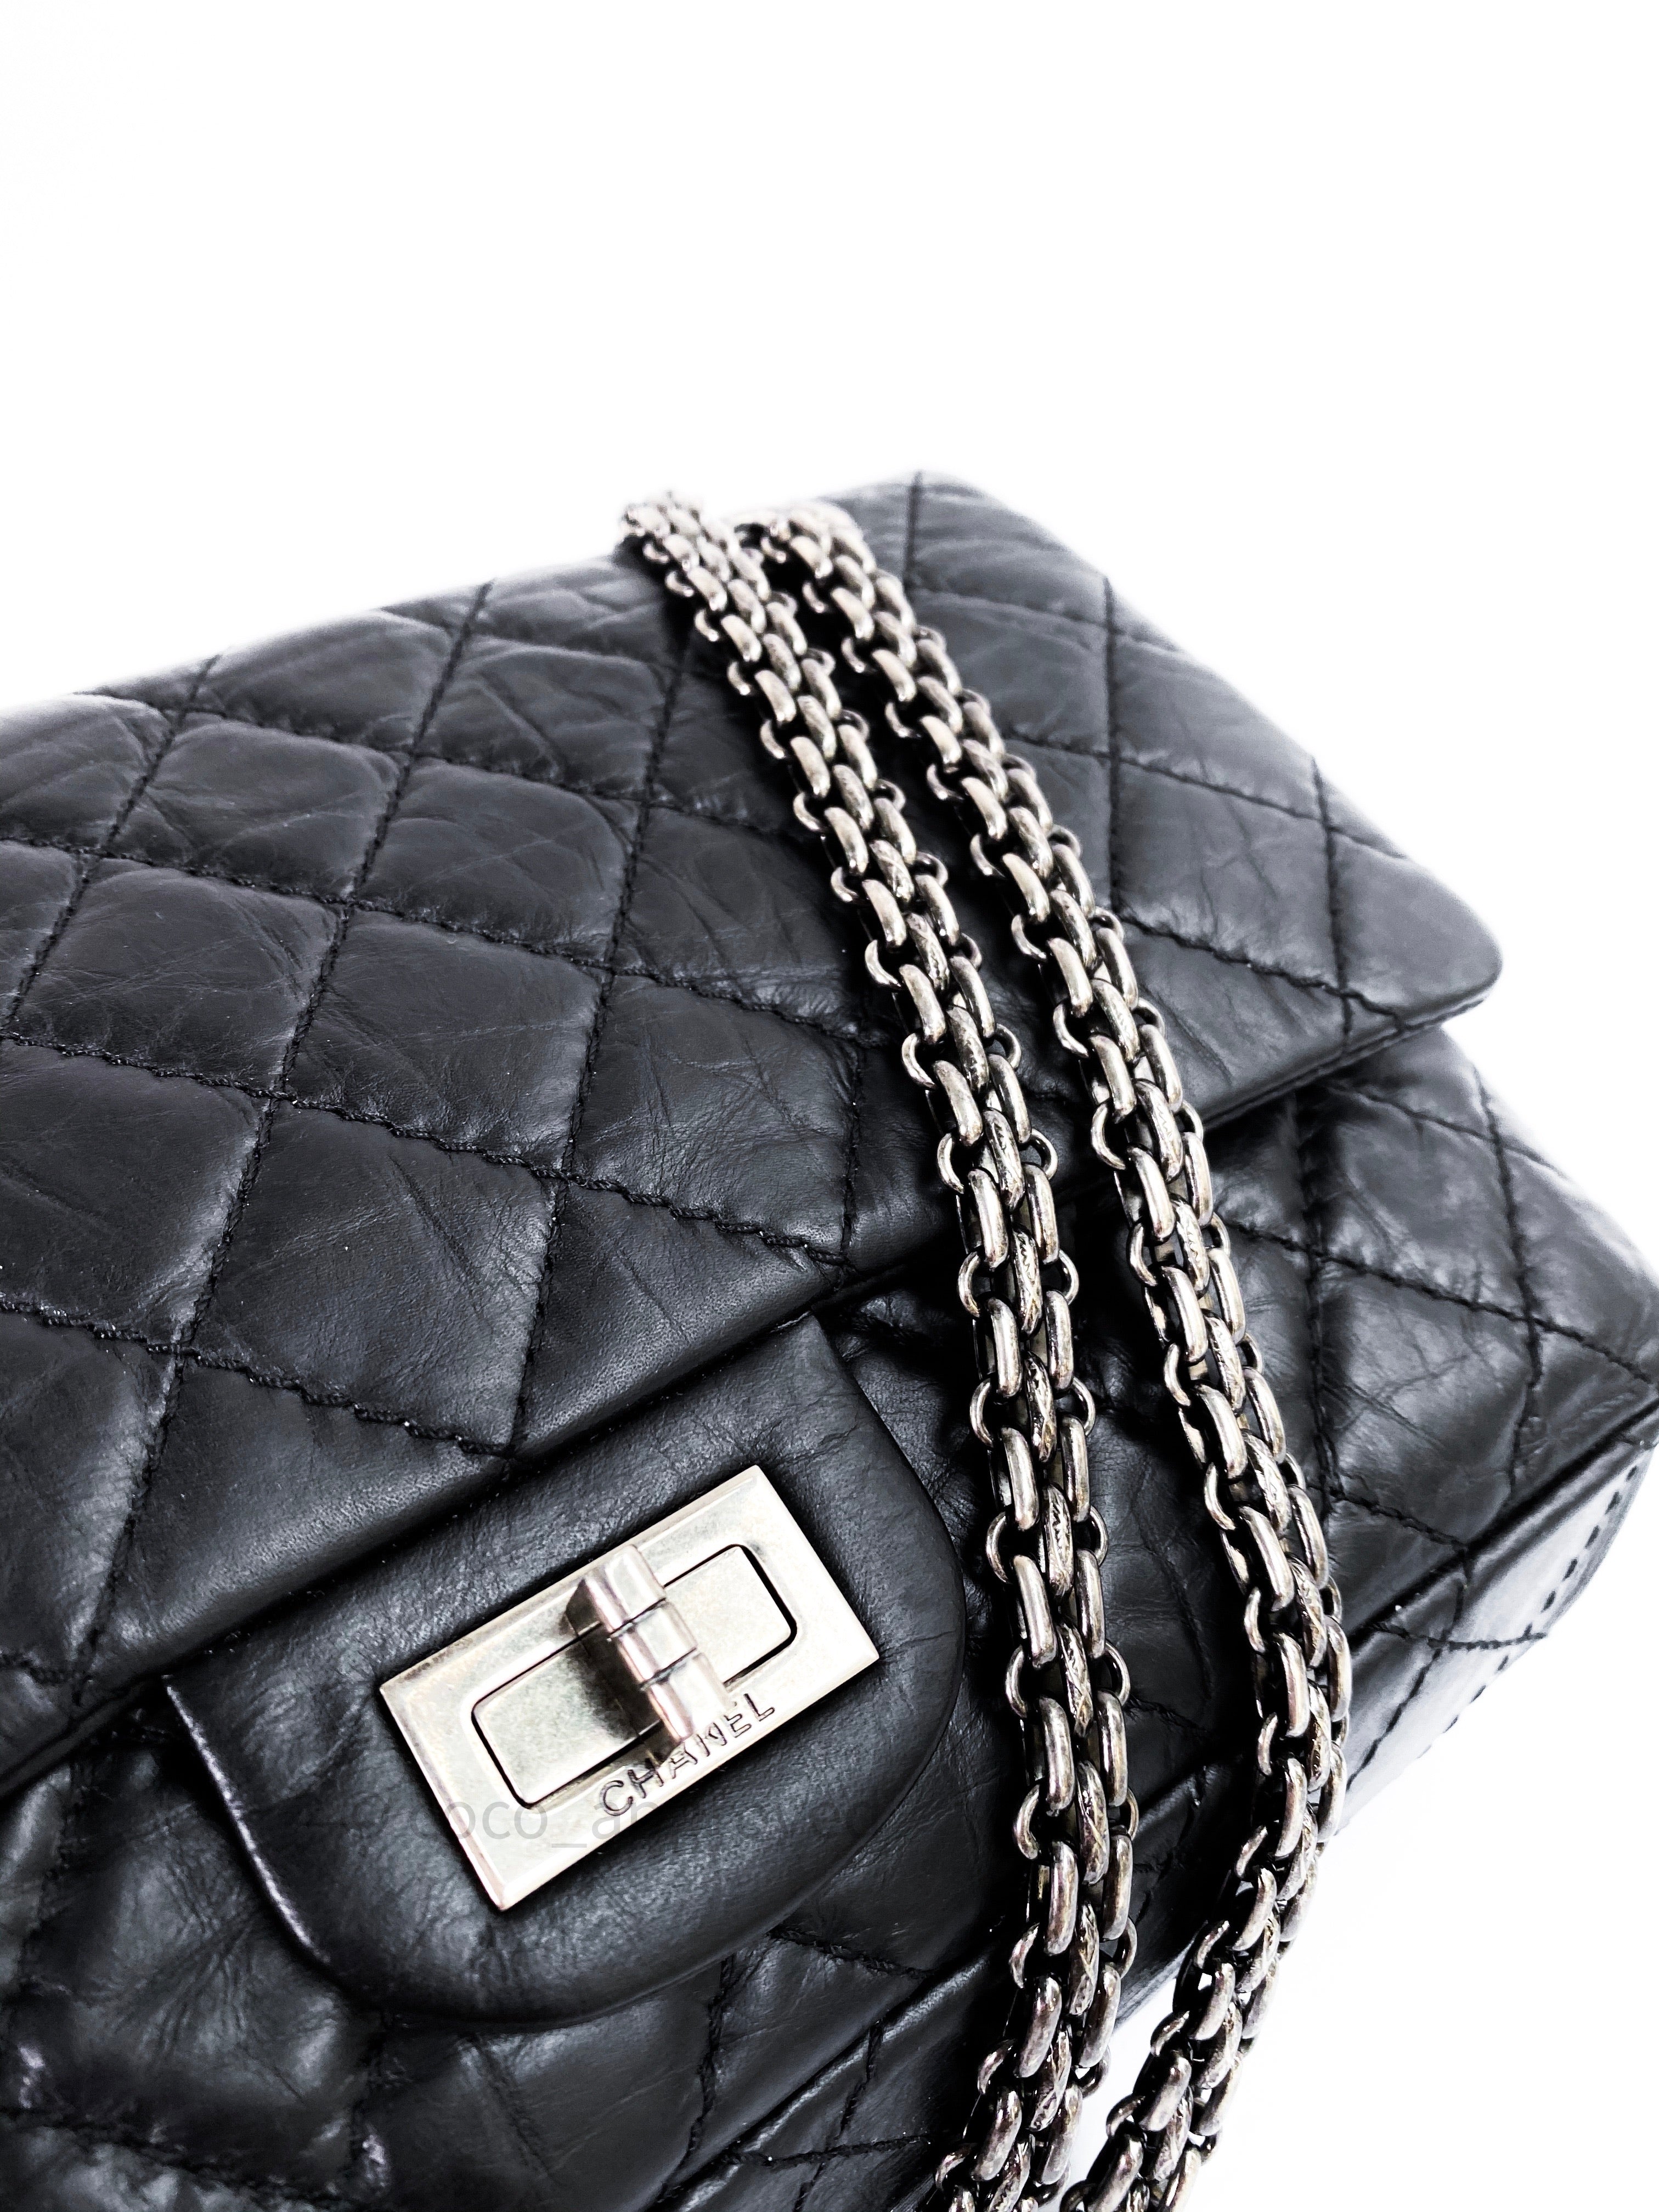 Chanel 2.55 Reissue Aged Calfskin 225 Flap Black Ruthenium Hardware – Coco  Approved Studio